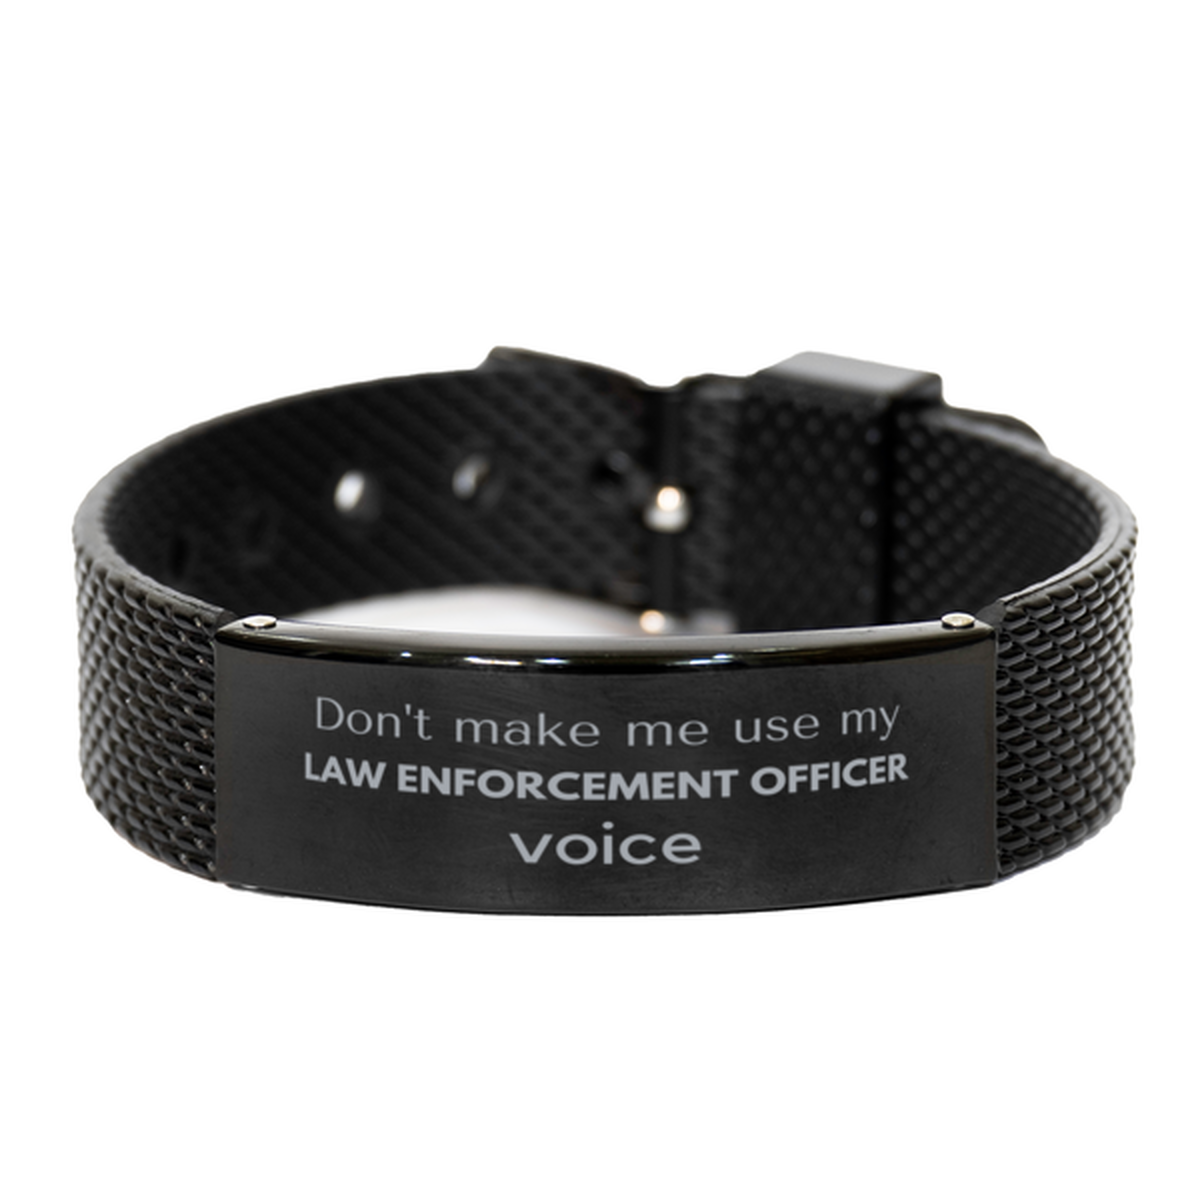 Don't make me use my Law Enforcement Officer voice, Sarcasm Law Enforcement Officer Gifts, Christmas Law Enforcement Officer Black Shark Mesh Bracelet Birthday Unique Gifts For Law Enforcement Officer Coworkers, Men, Women, Colleague, Friends